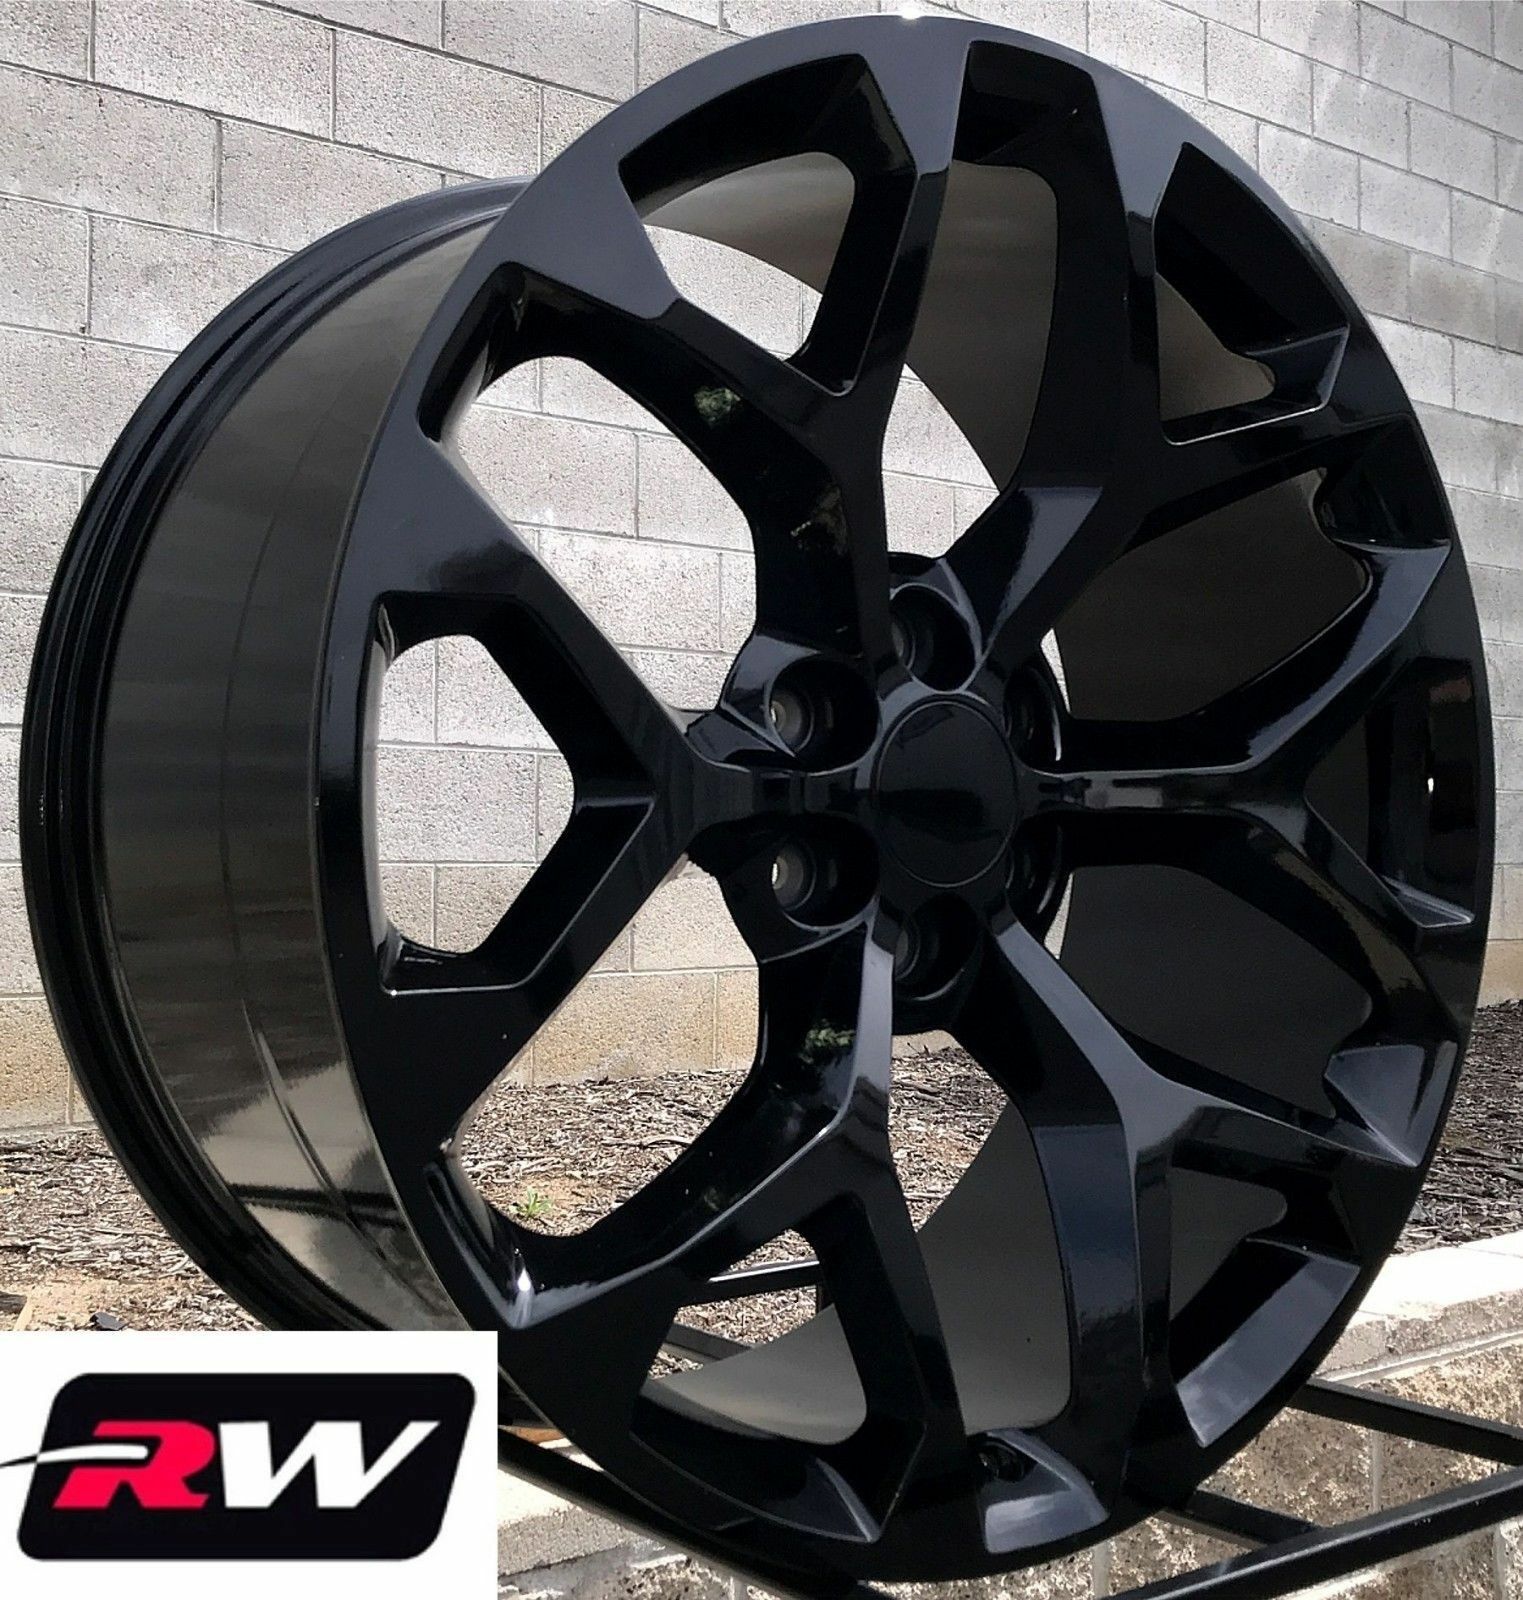 Are 24 Inch Rims Bad for Your Truck?